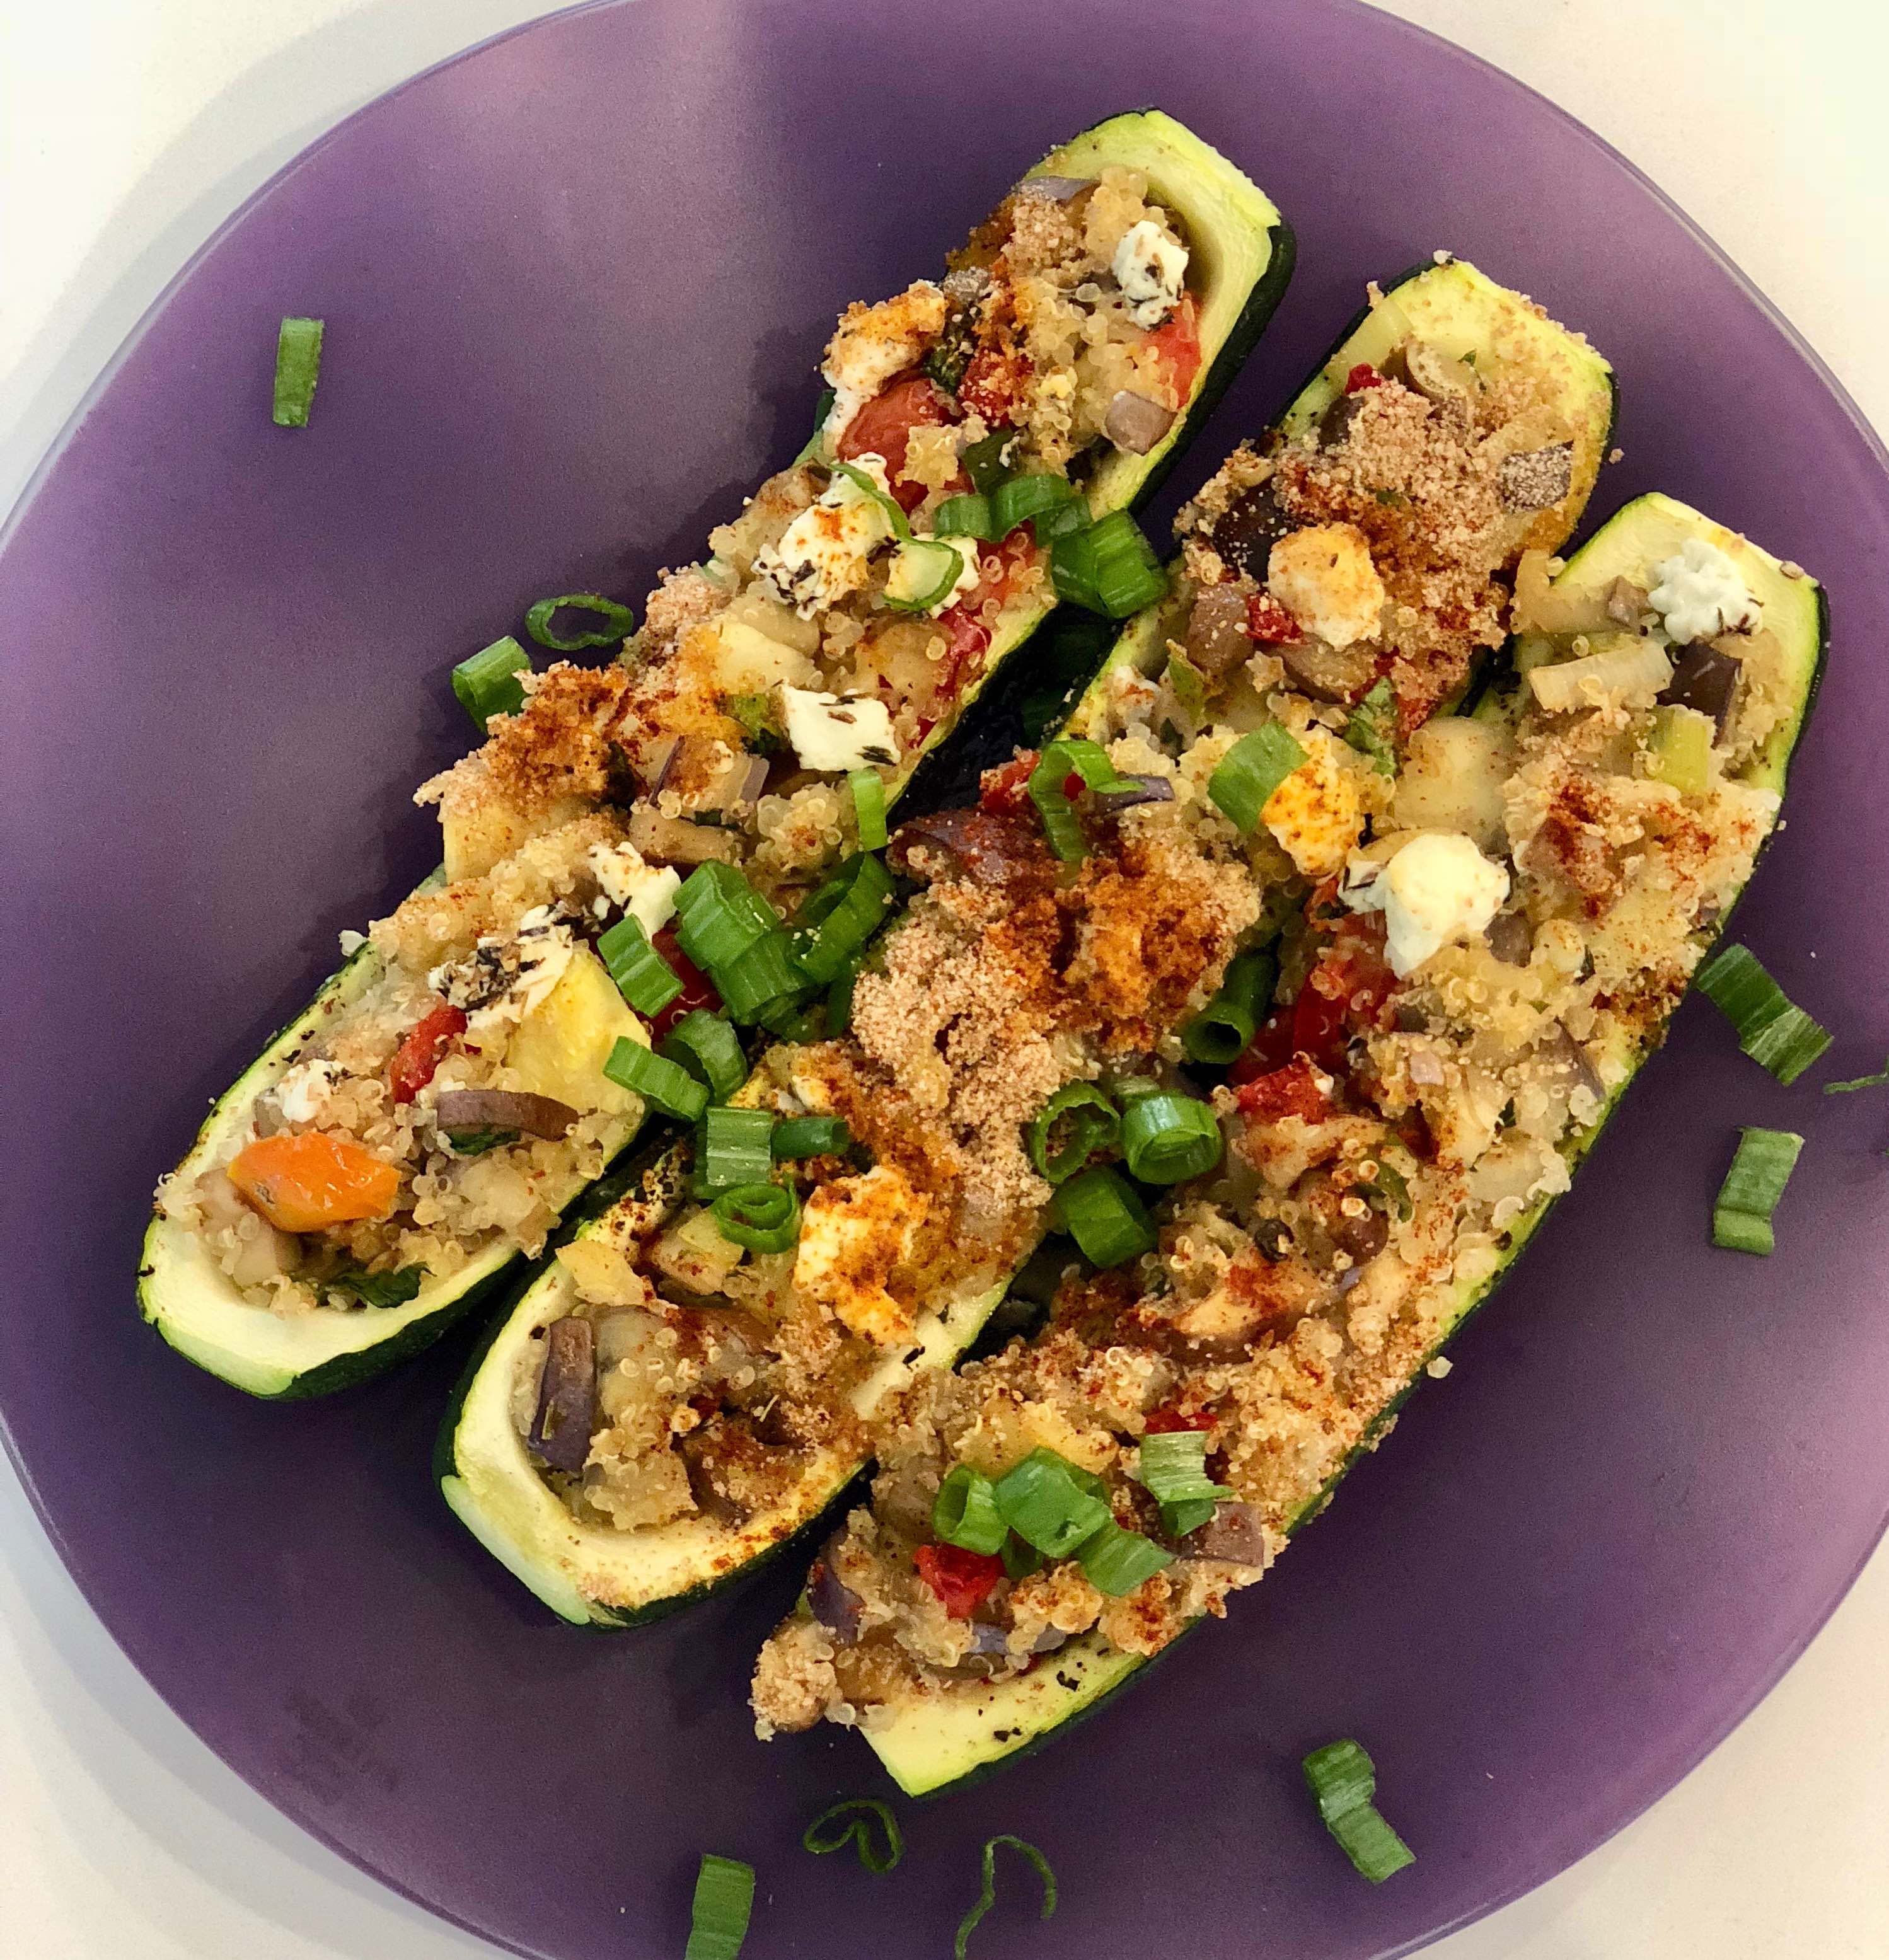 Stuffed Zucchini with Quinoa and Goat Cheese